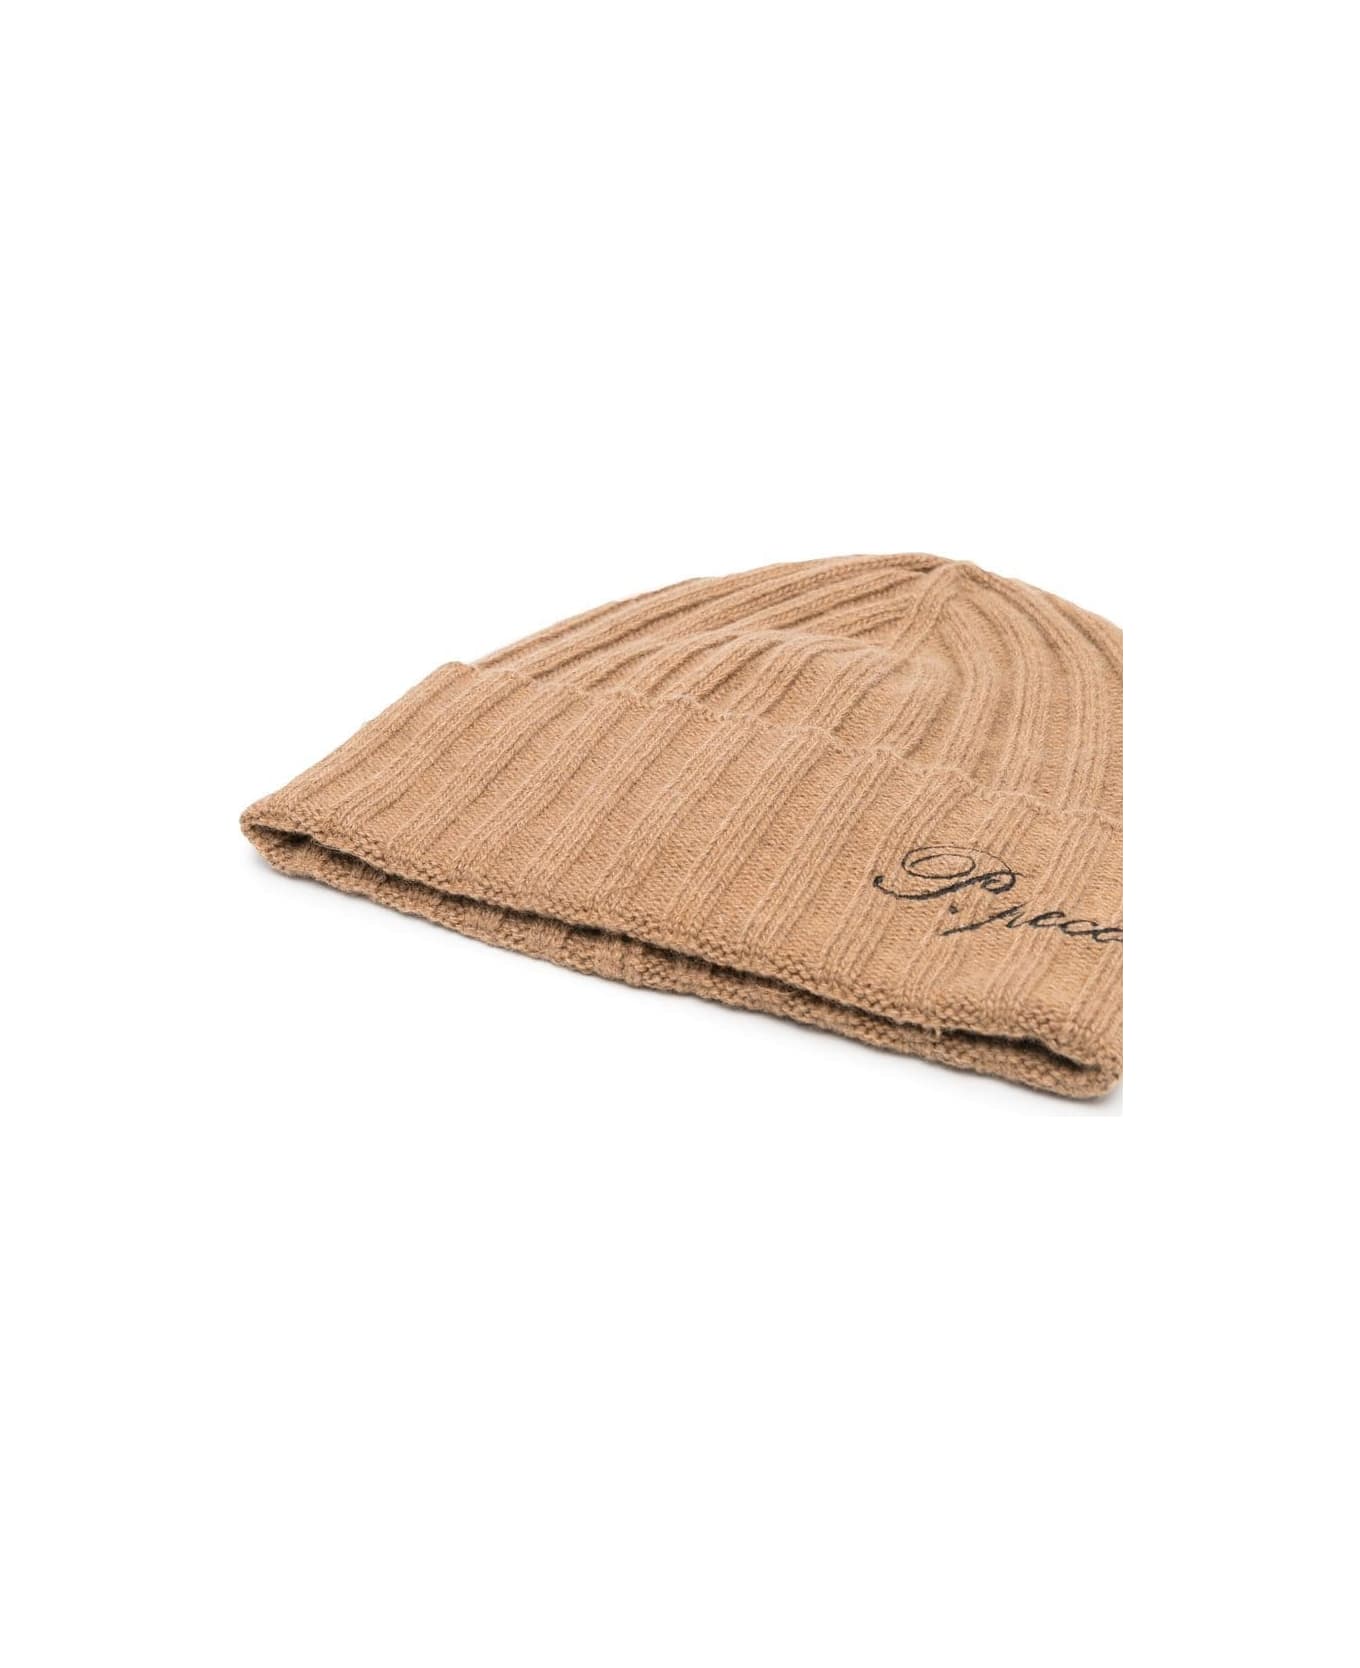 Paolo Pecora Hat With Logo - Camel アクセサリー＆ギフト